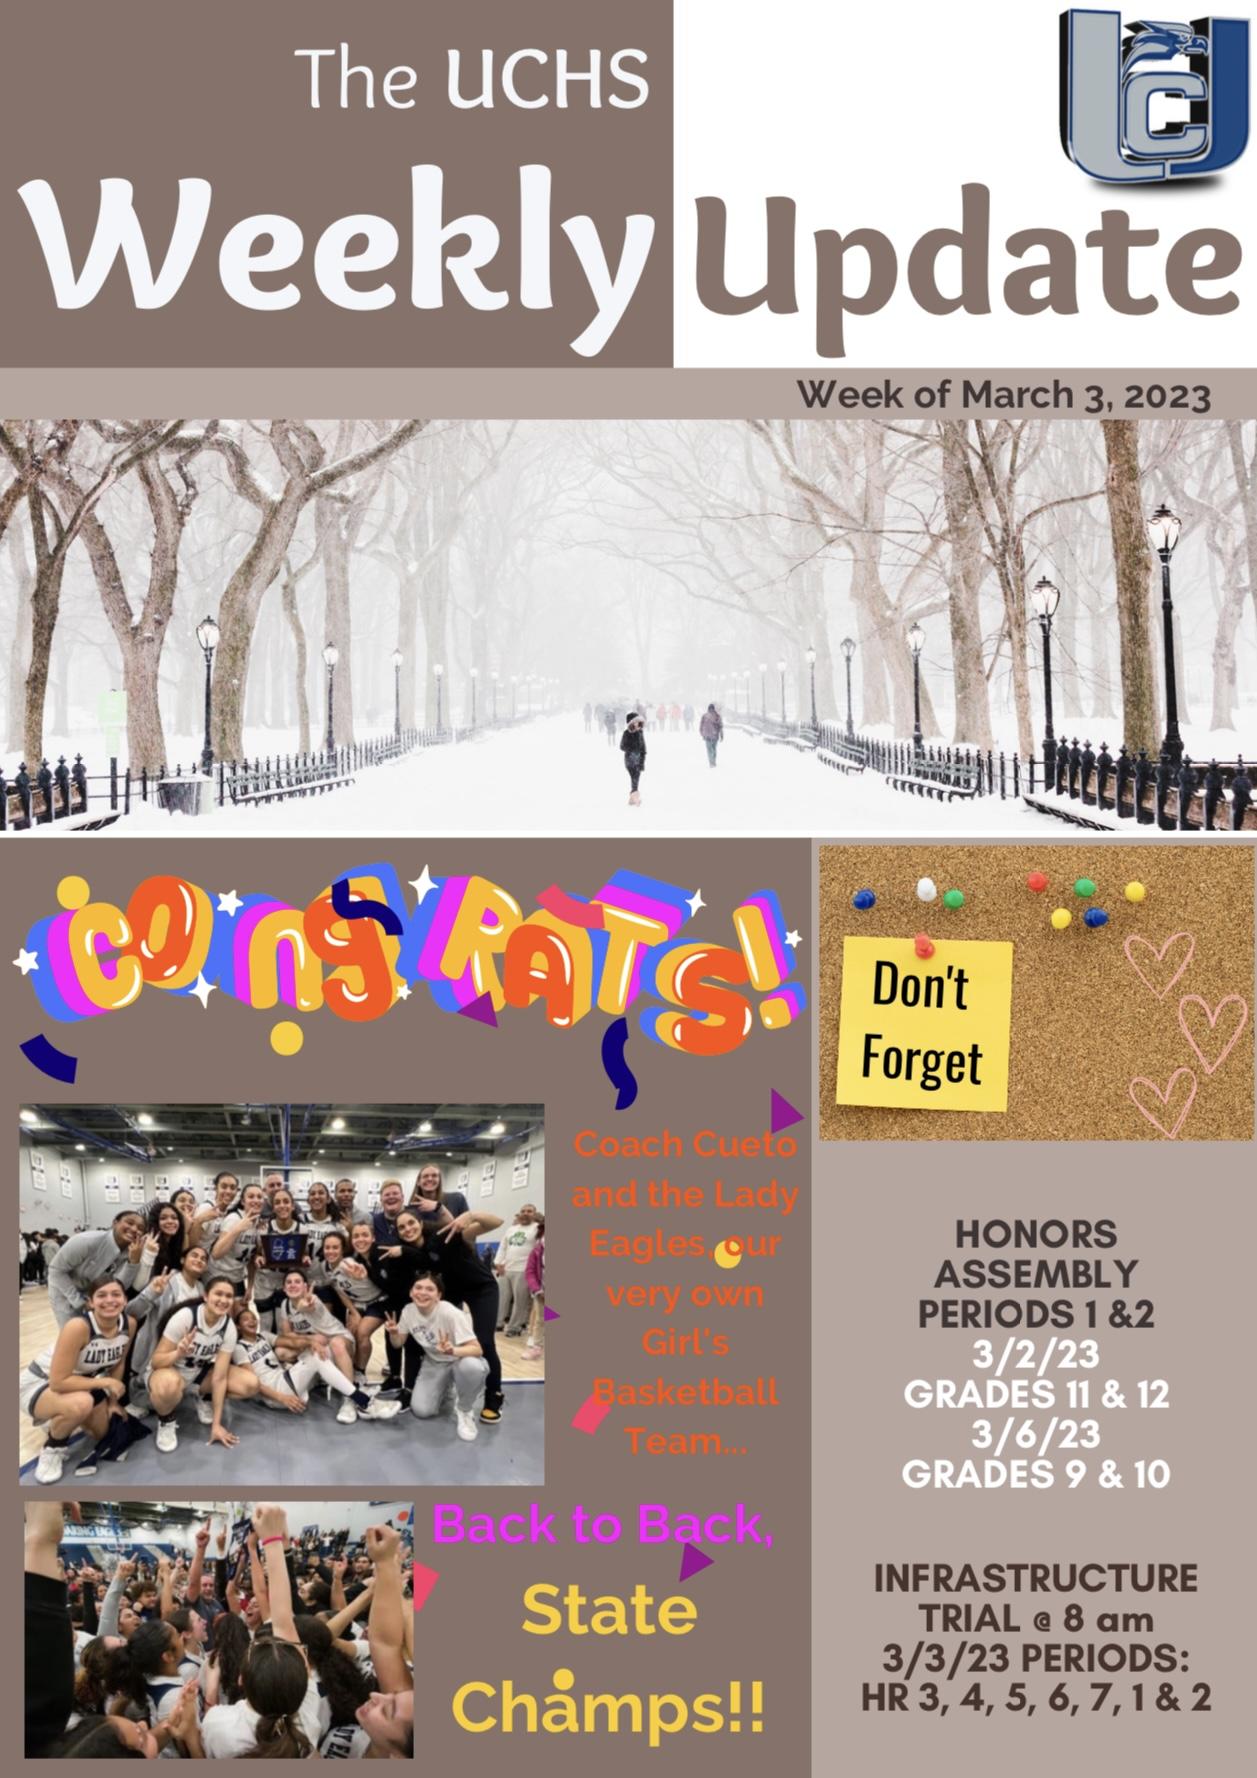 The UCHS Weekly Update-March 3, 2023-English-Page 1